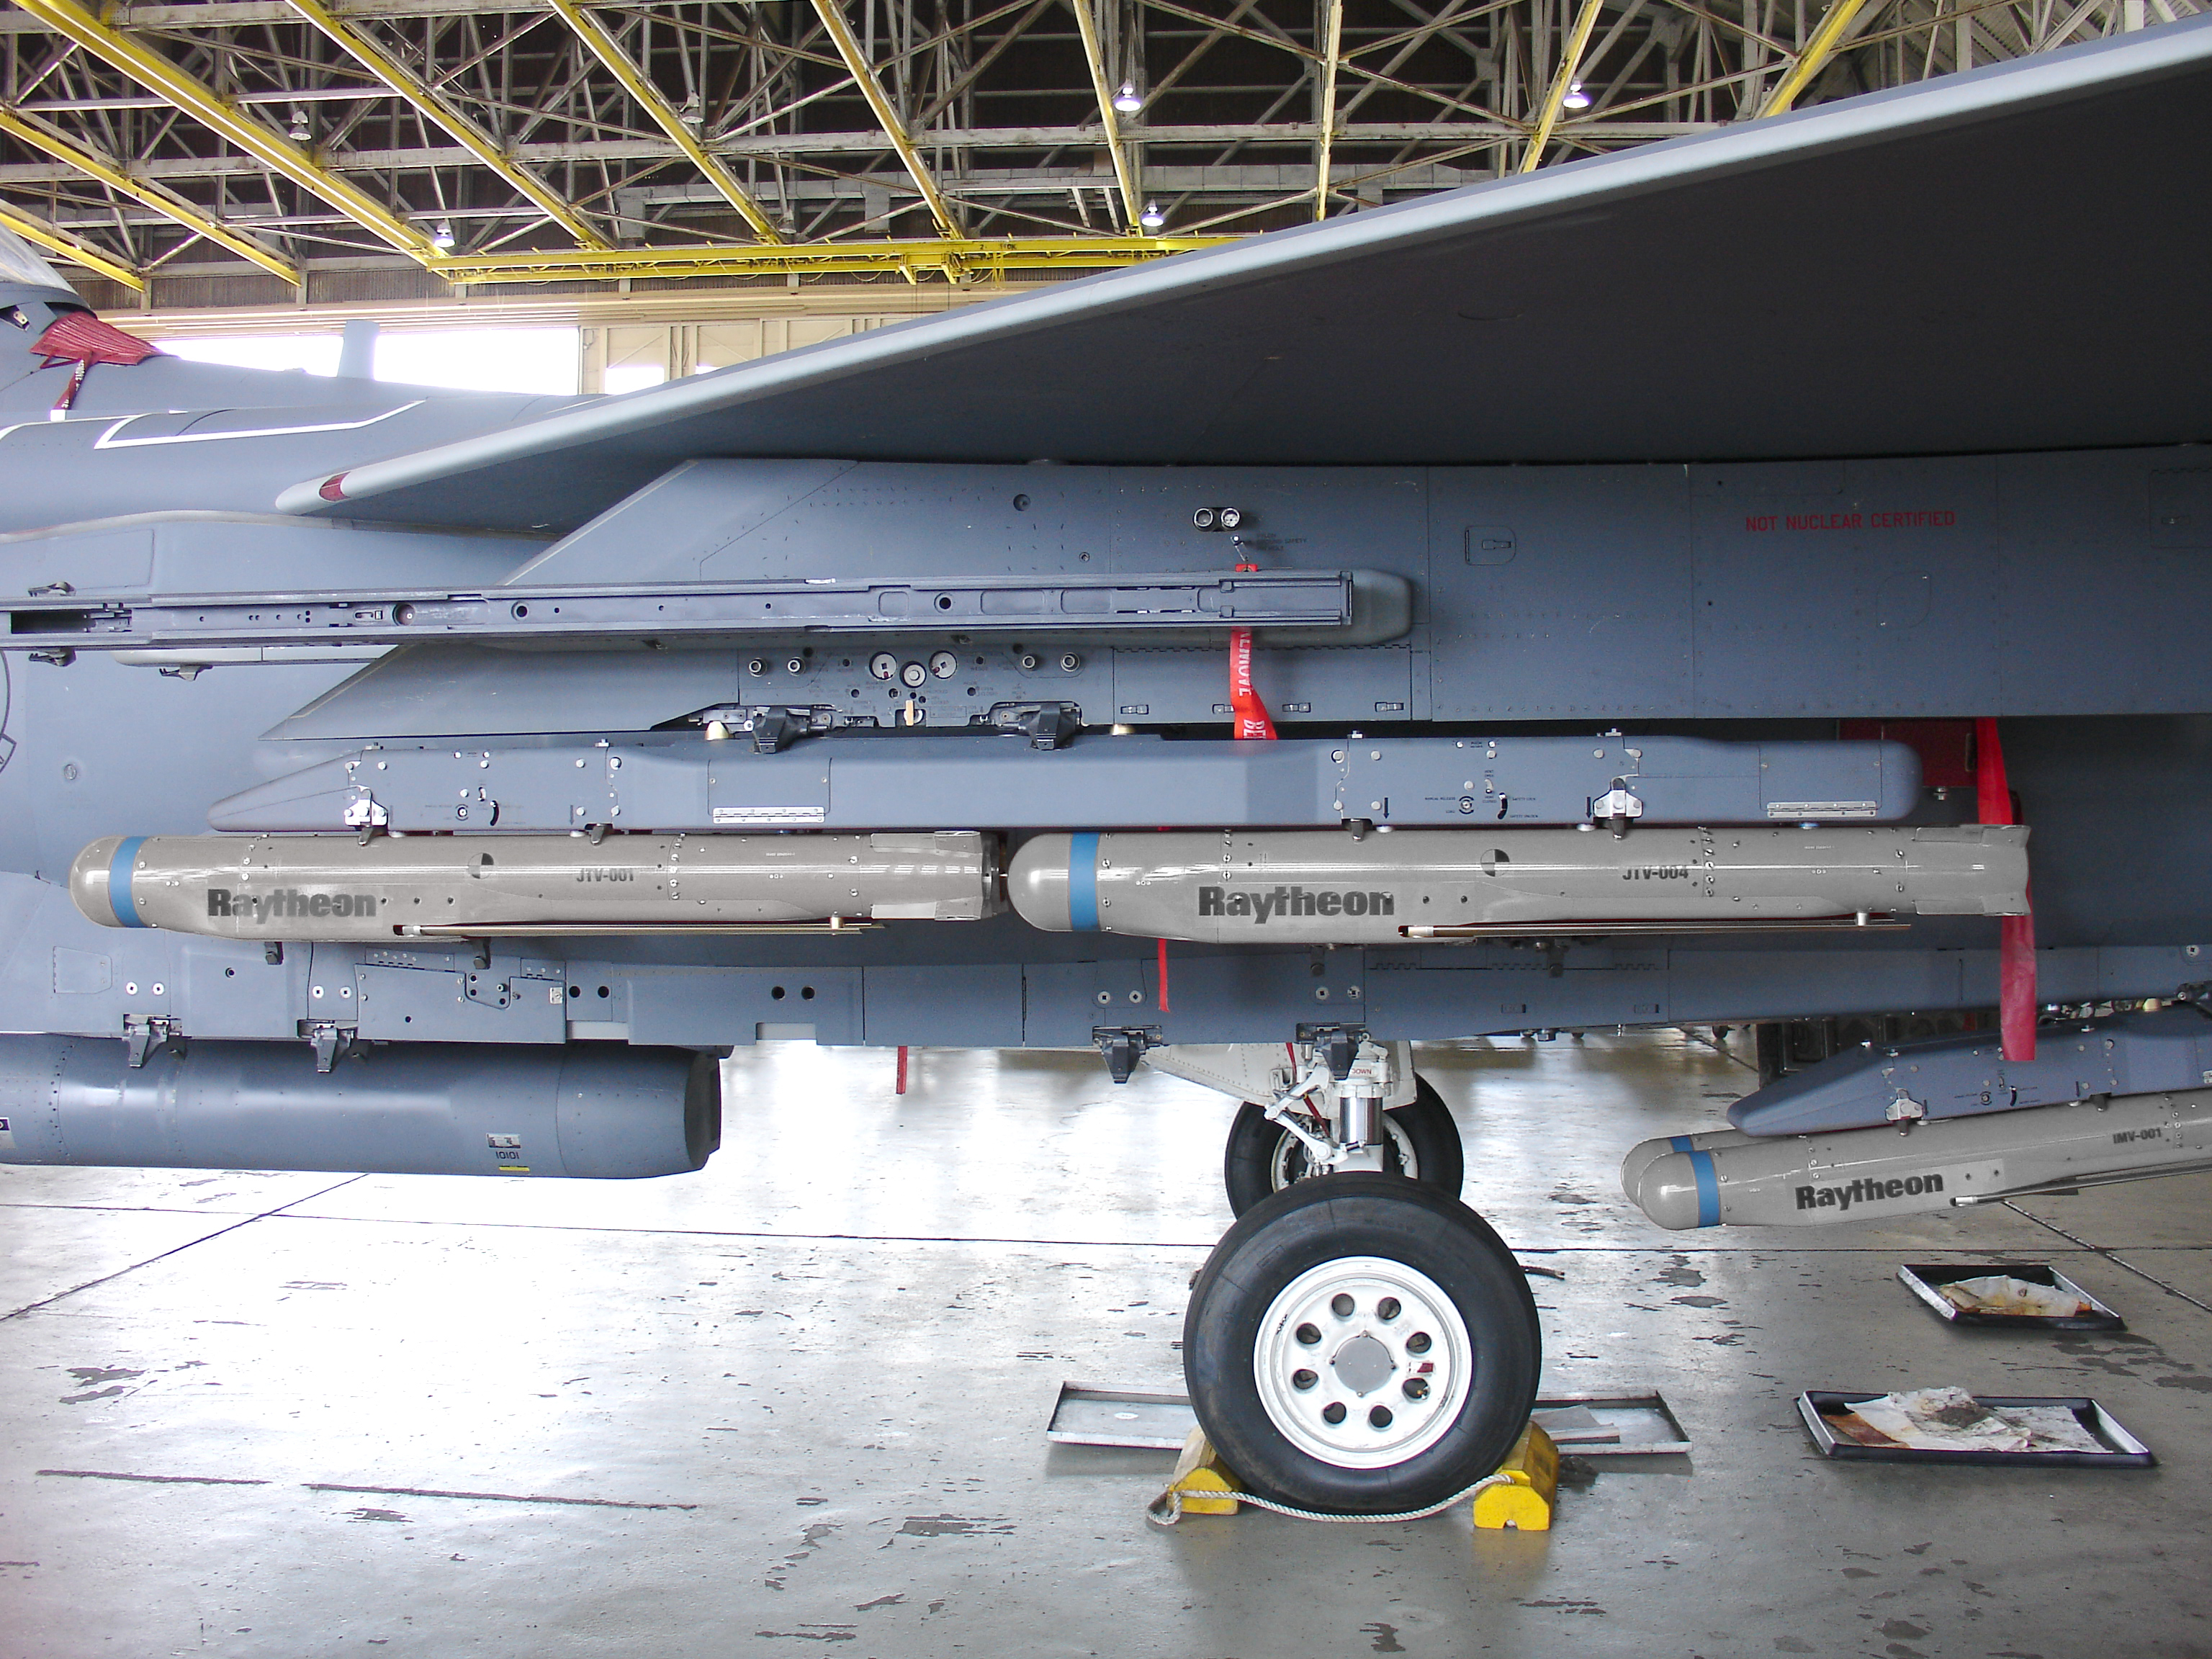 Locked and loaded, the F-15E fighter aircraft can carry seven groups of four StormBreaker smart weapons, for a total of 28 munitions.